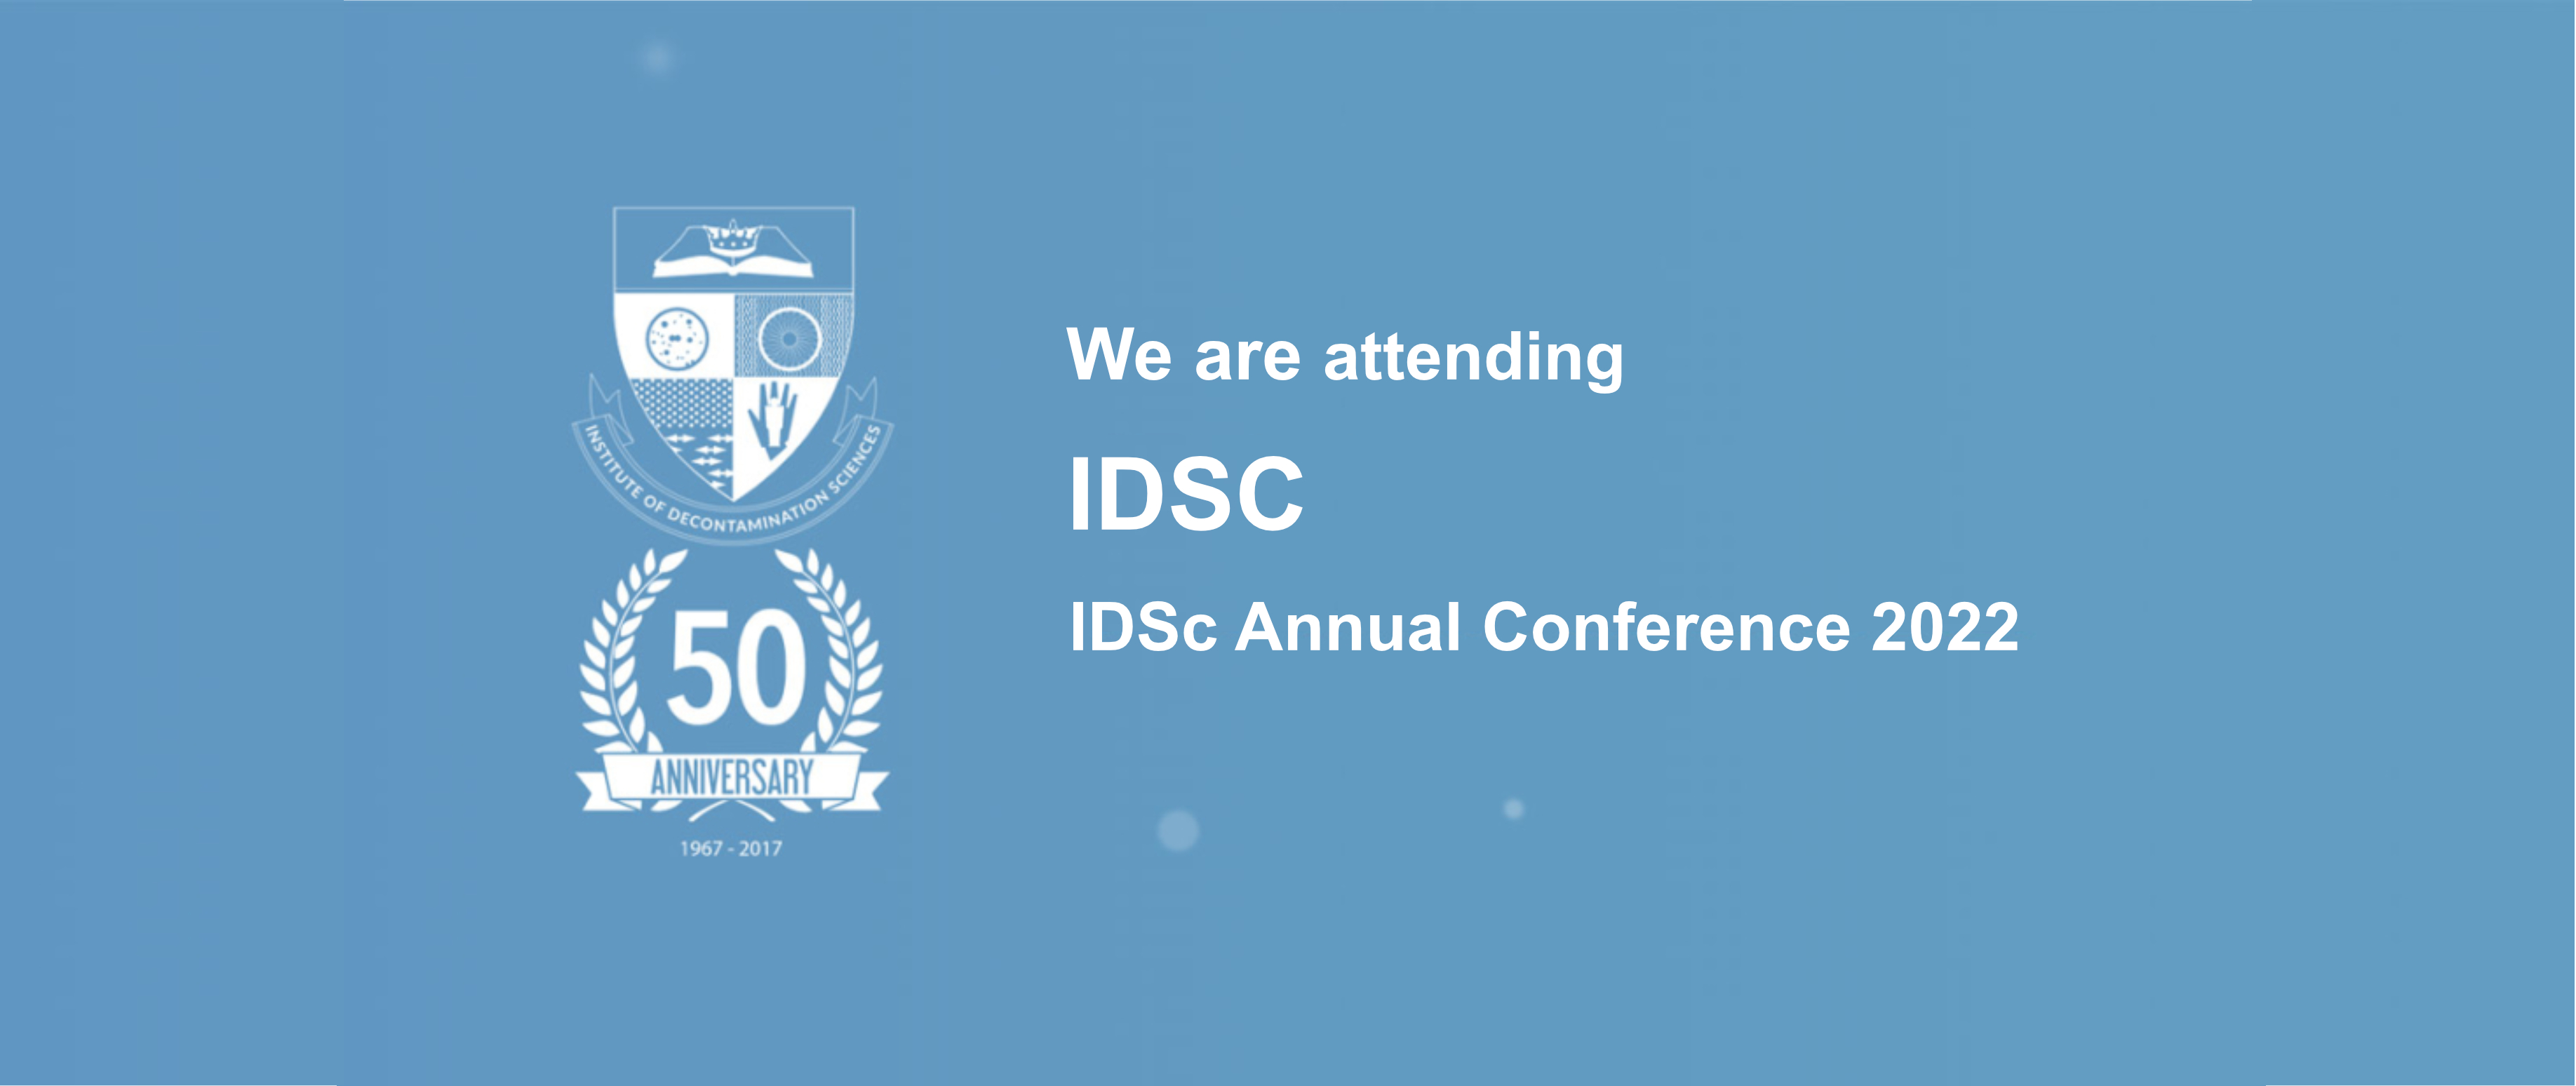 Blue banner with IDSc badge and attendance announcement